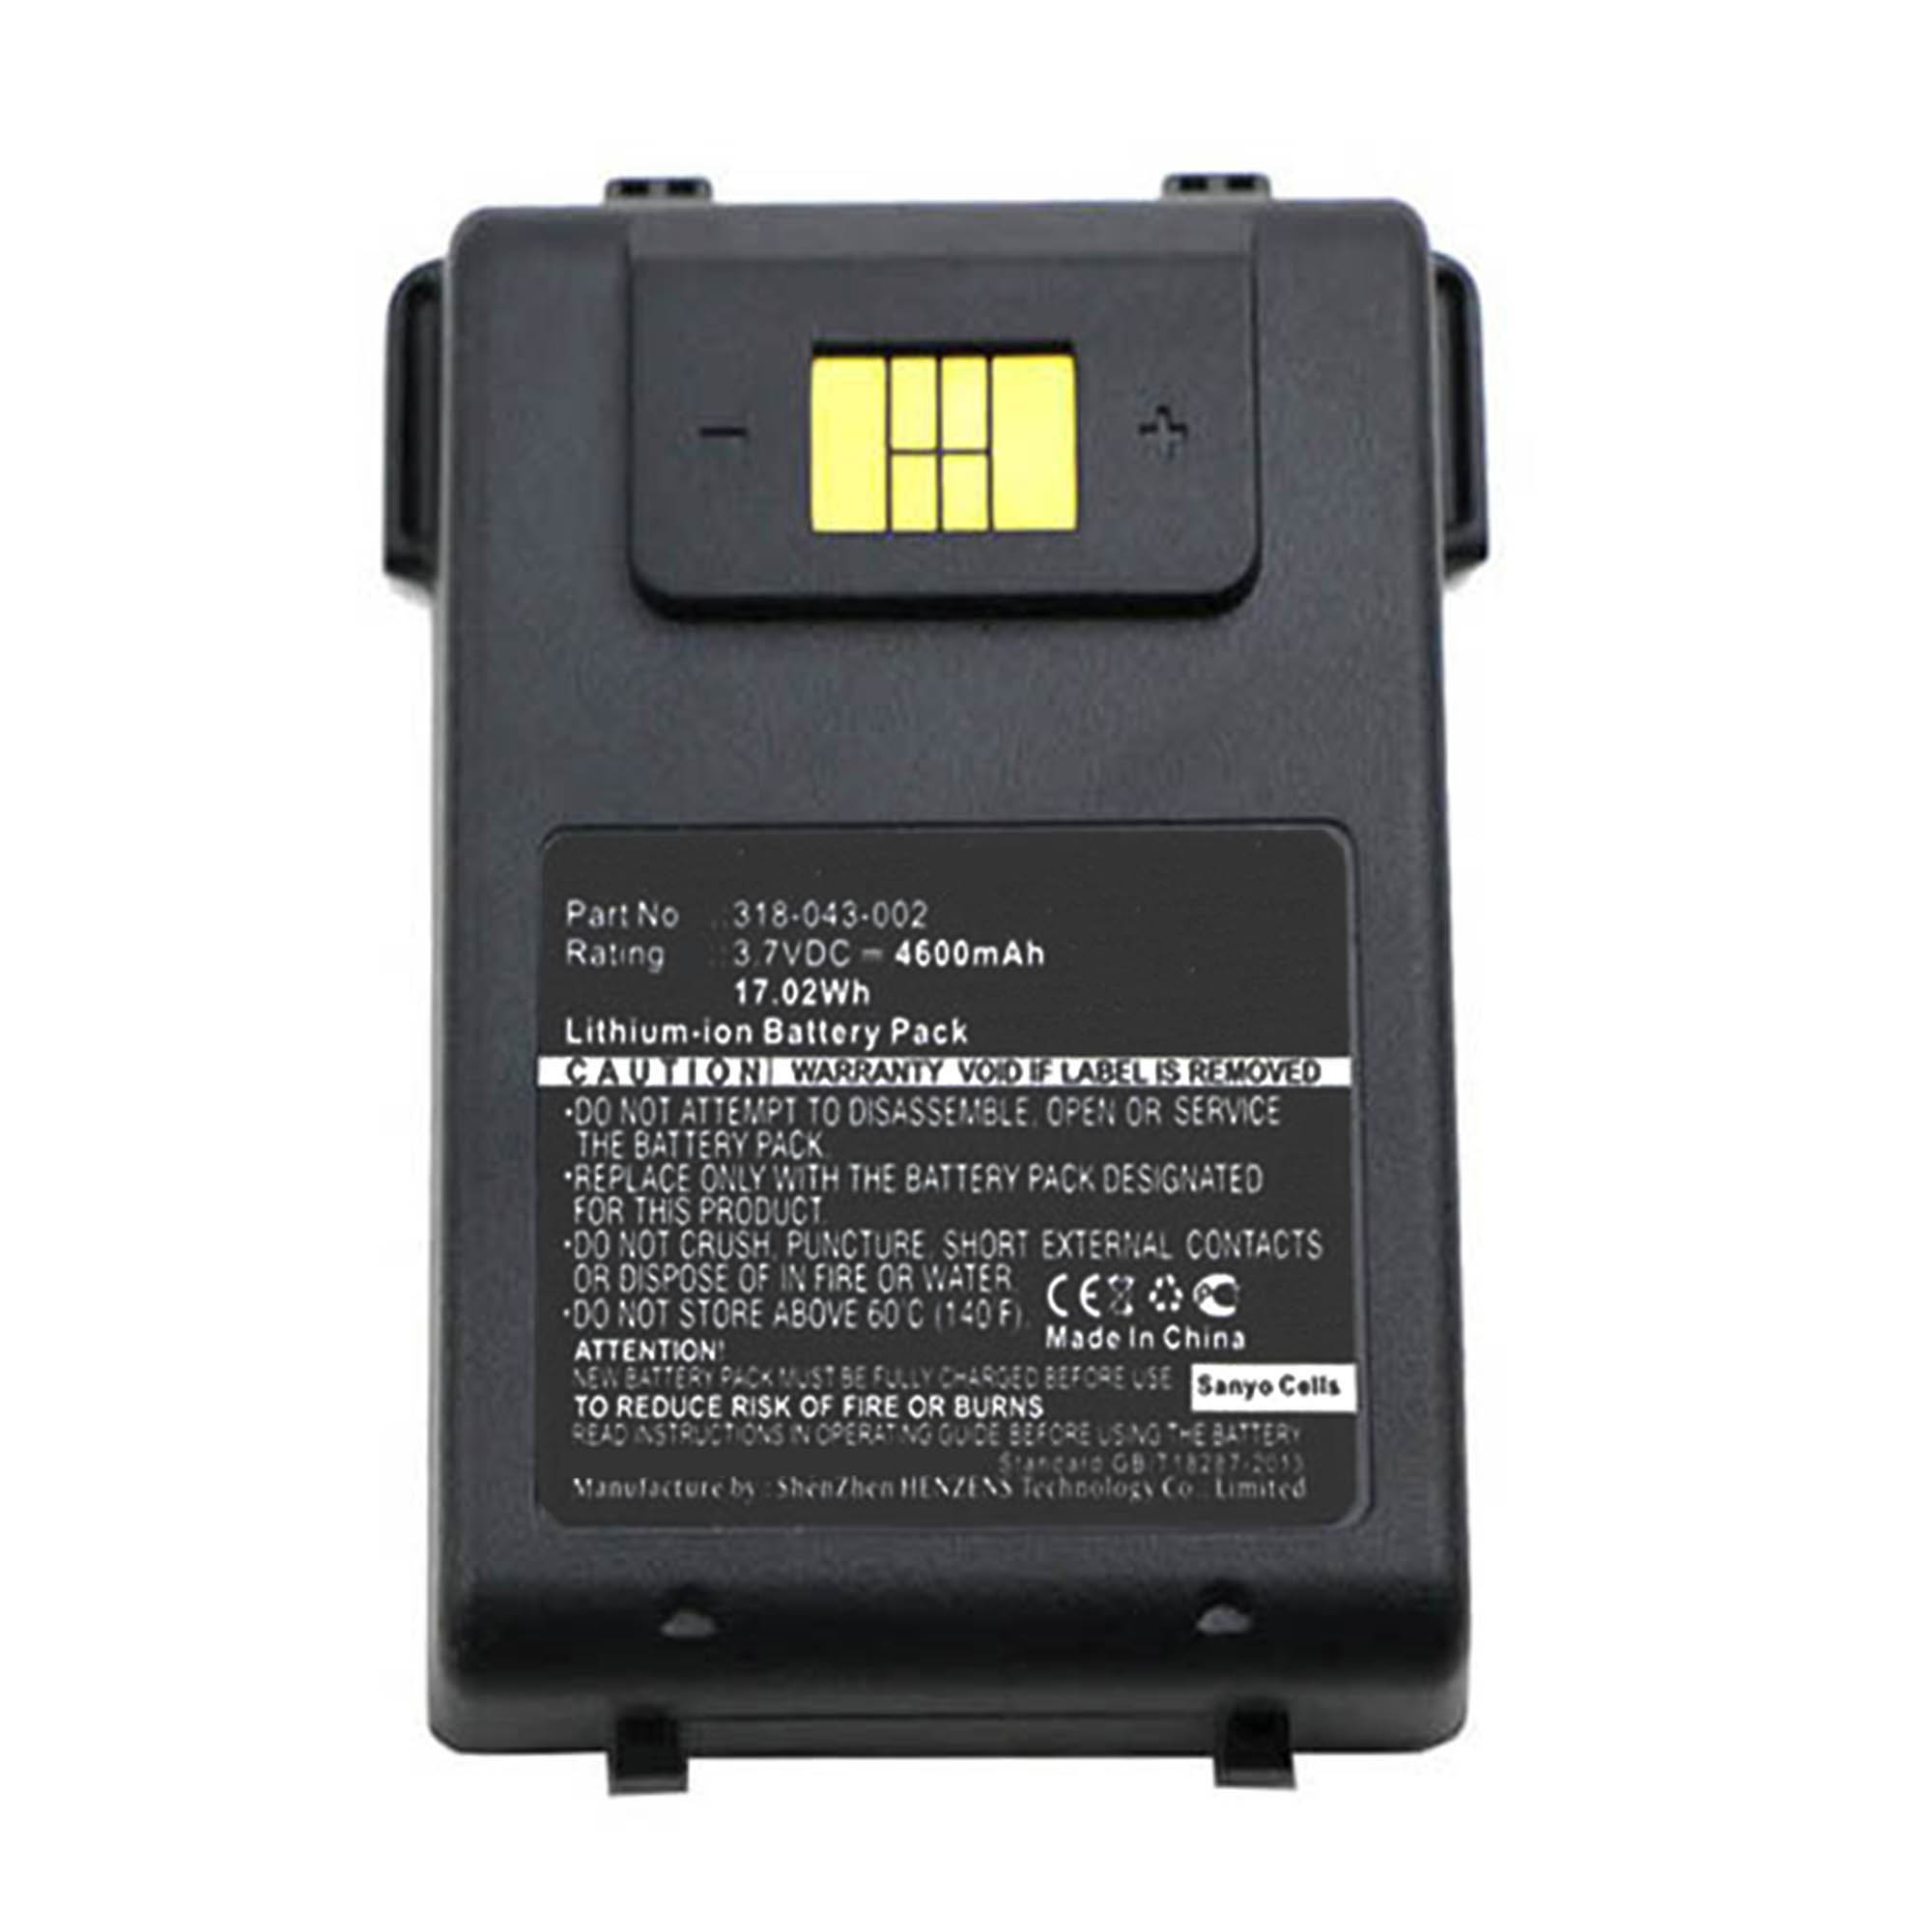 Synergy Digital Barcode Scanner Battery, Compatible with Intermec 318-043-012 Barcode Scanner Battery (Li-ion, 3.7V, 4600mAh)